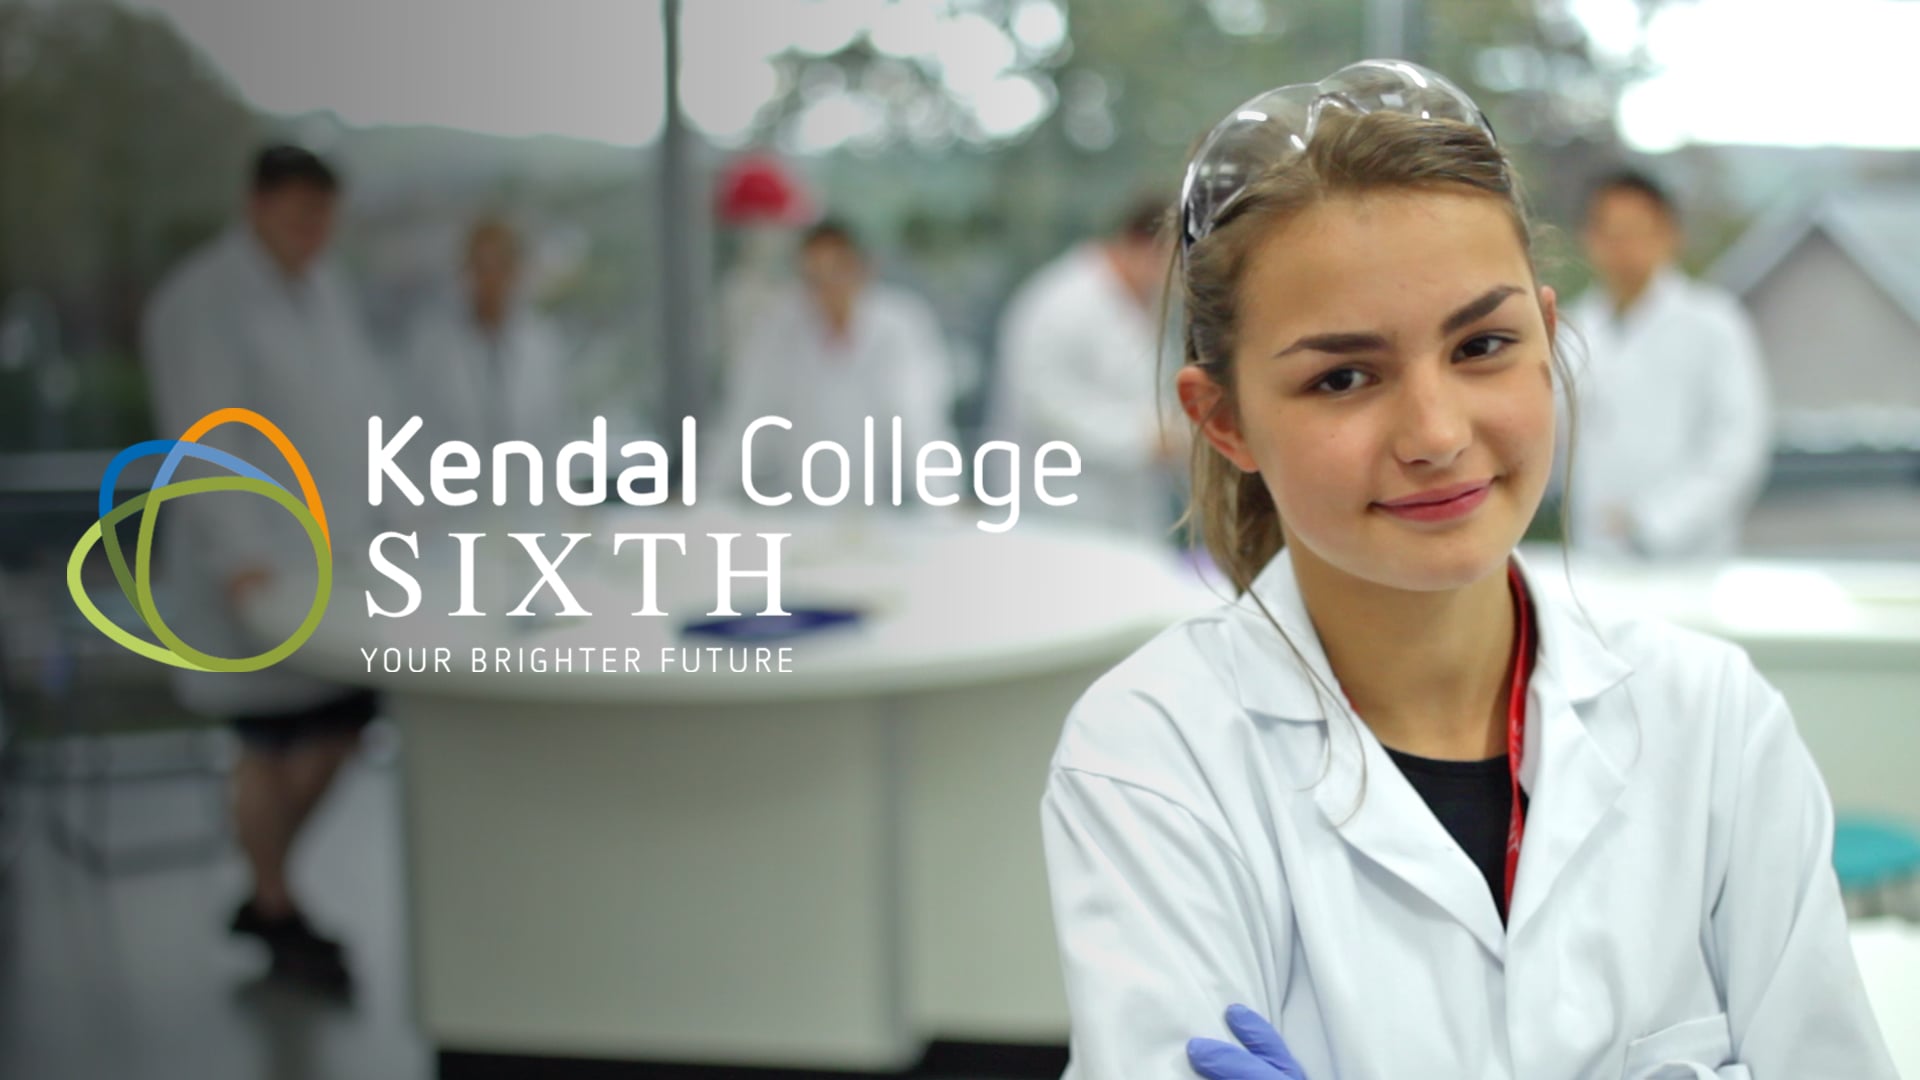 A-Levels at Kendal College